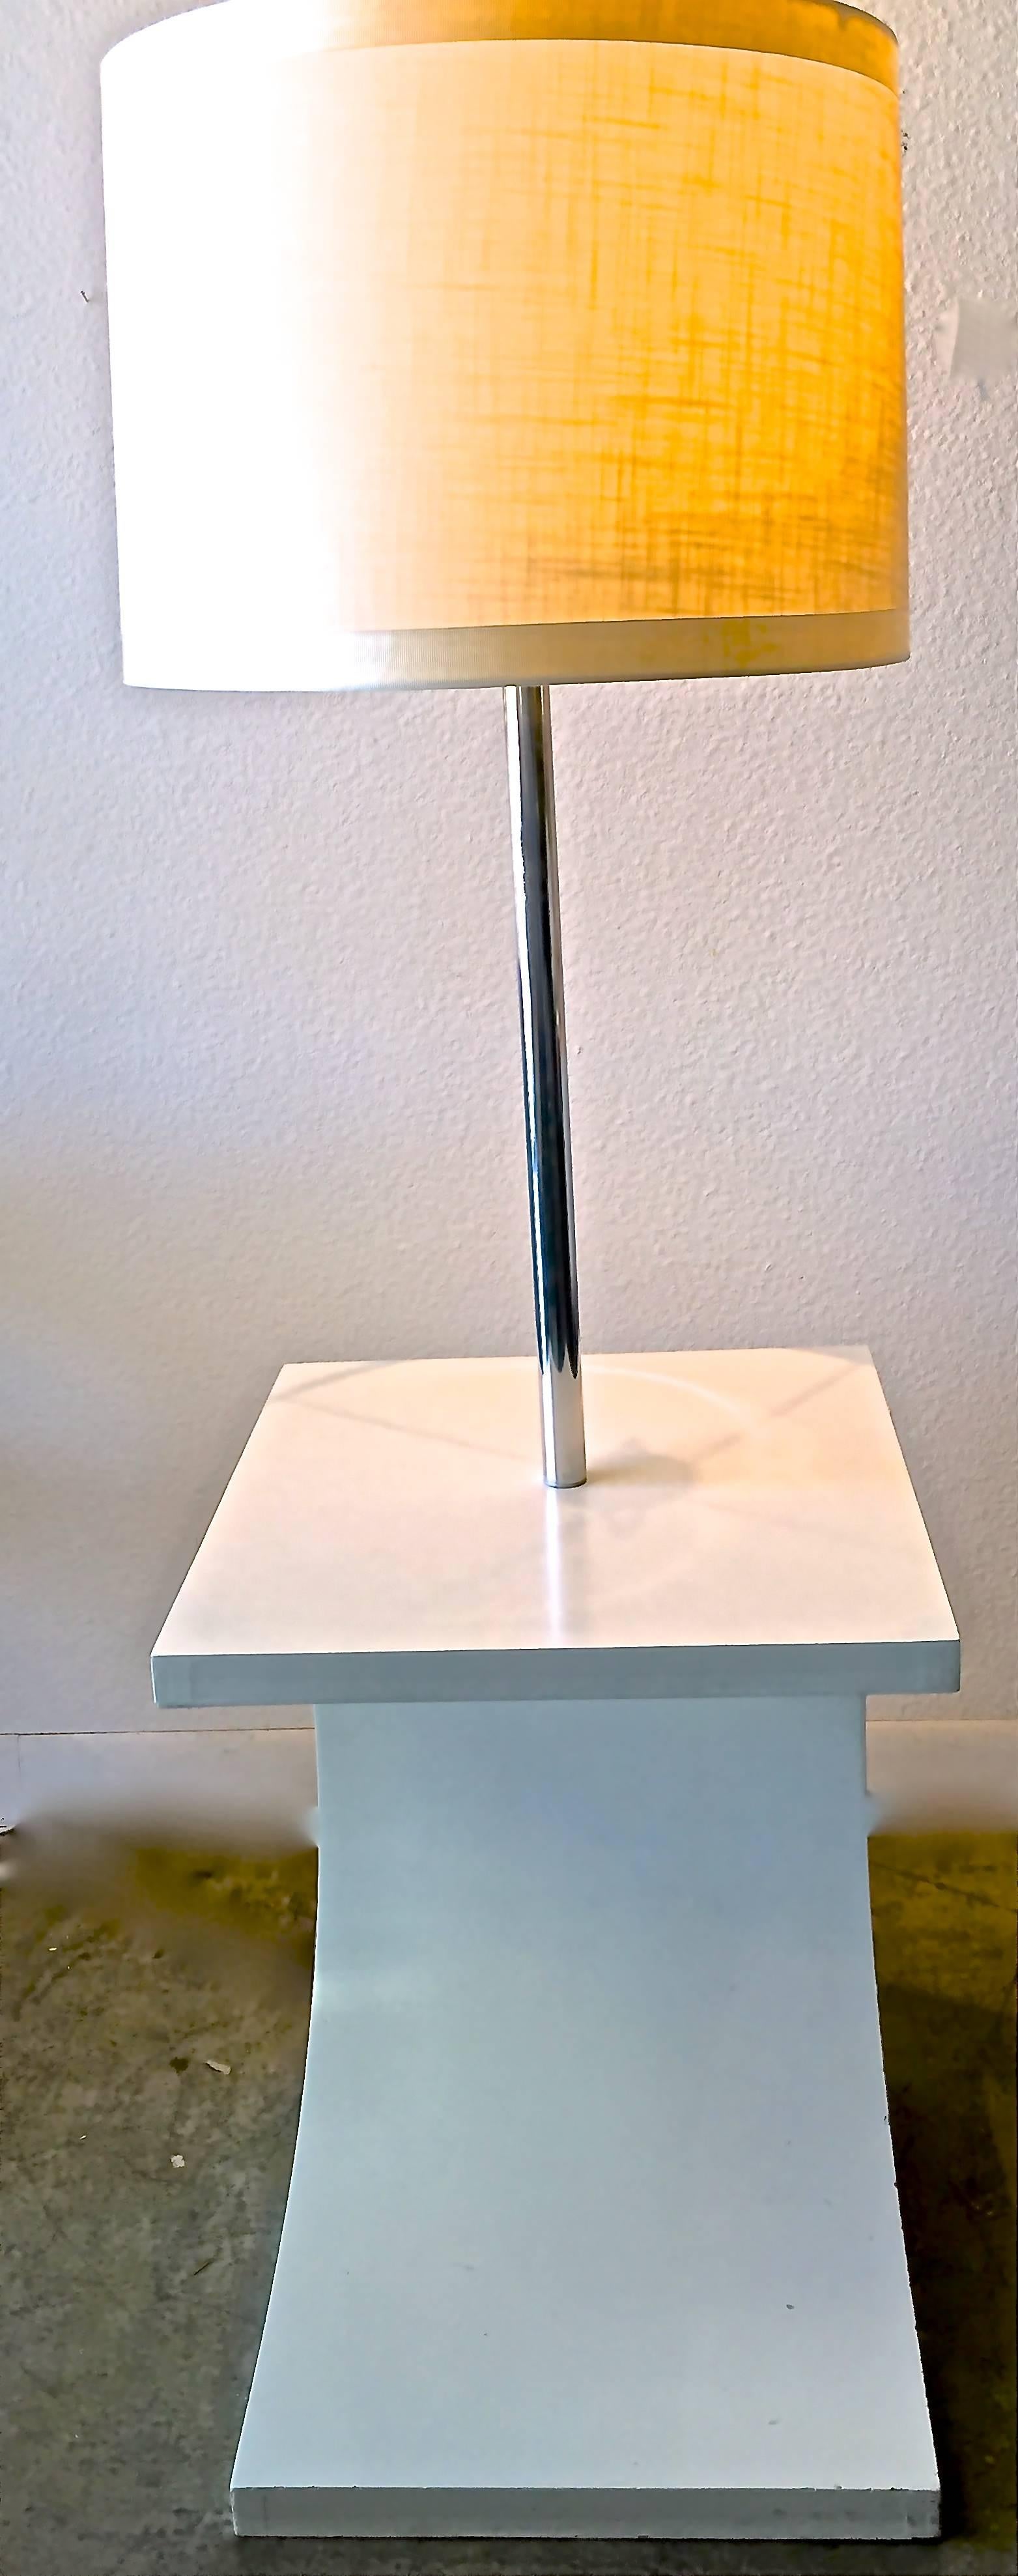 American Modeline Mid-Century Modern Sculptural Lamp Table in White Lacquer and Chrome For Sale